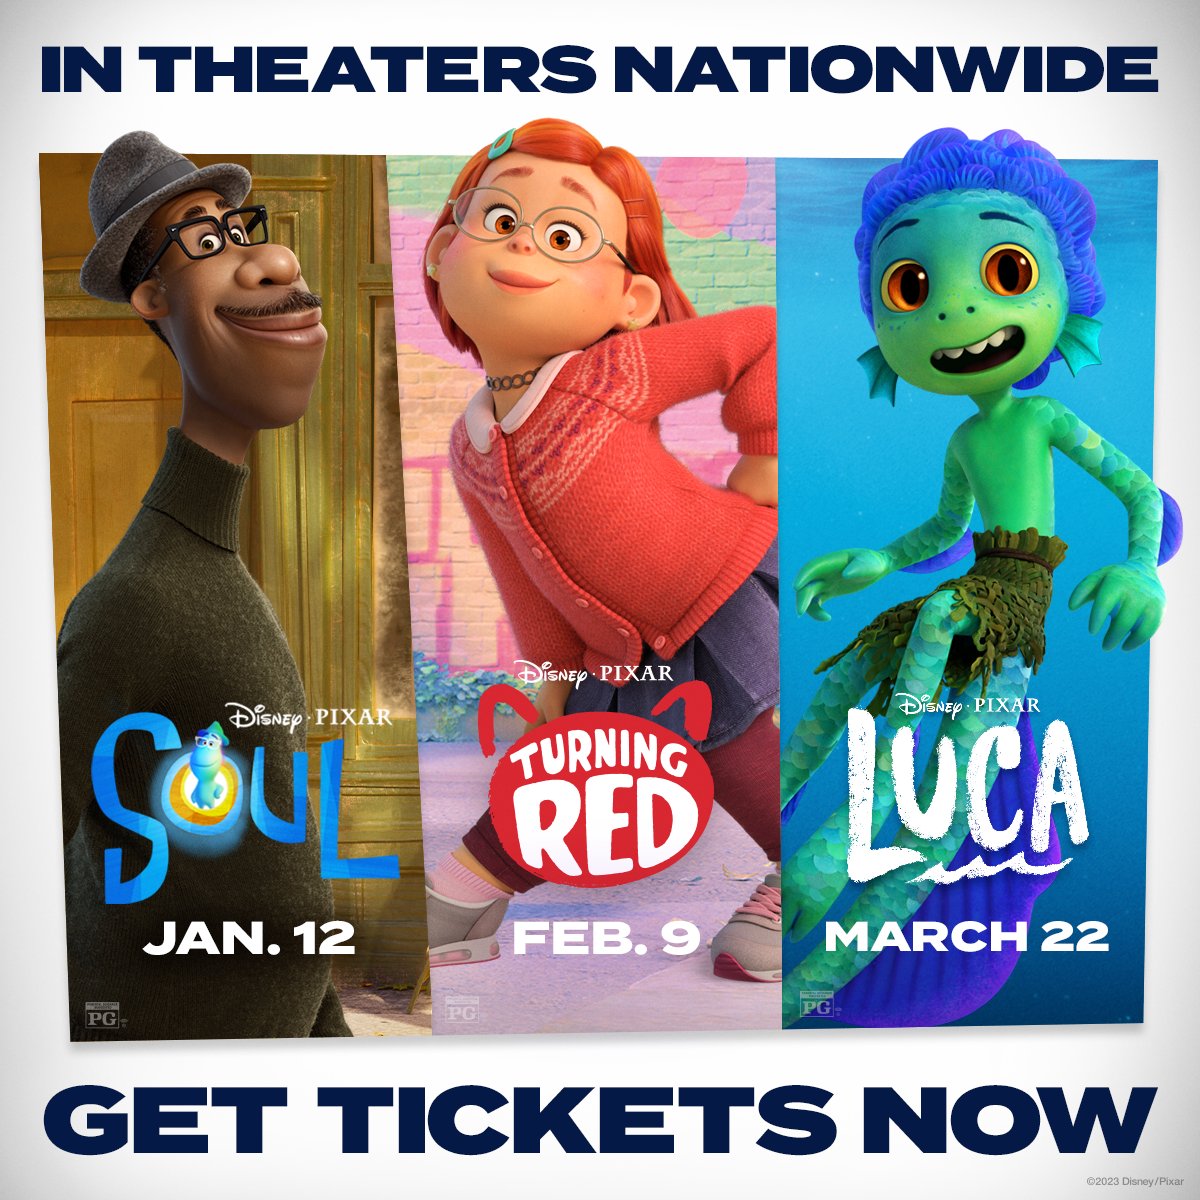 Grab your tickets for a Pixar adventure! 🌎❤️🛵 Experience Disney and Pixar's Soul, Turning Red, and Luca ON THE BIG SCREEN nationwide. 🎟️: fandango.com/PixarInTheaters